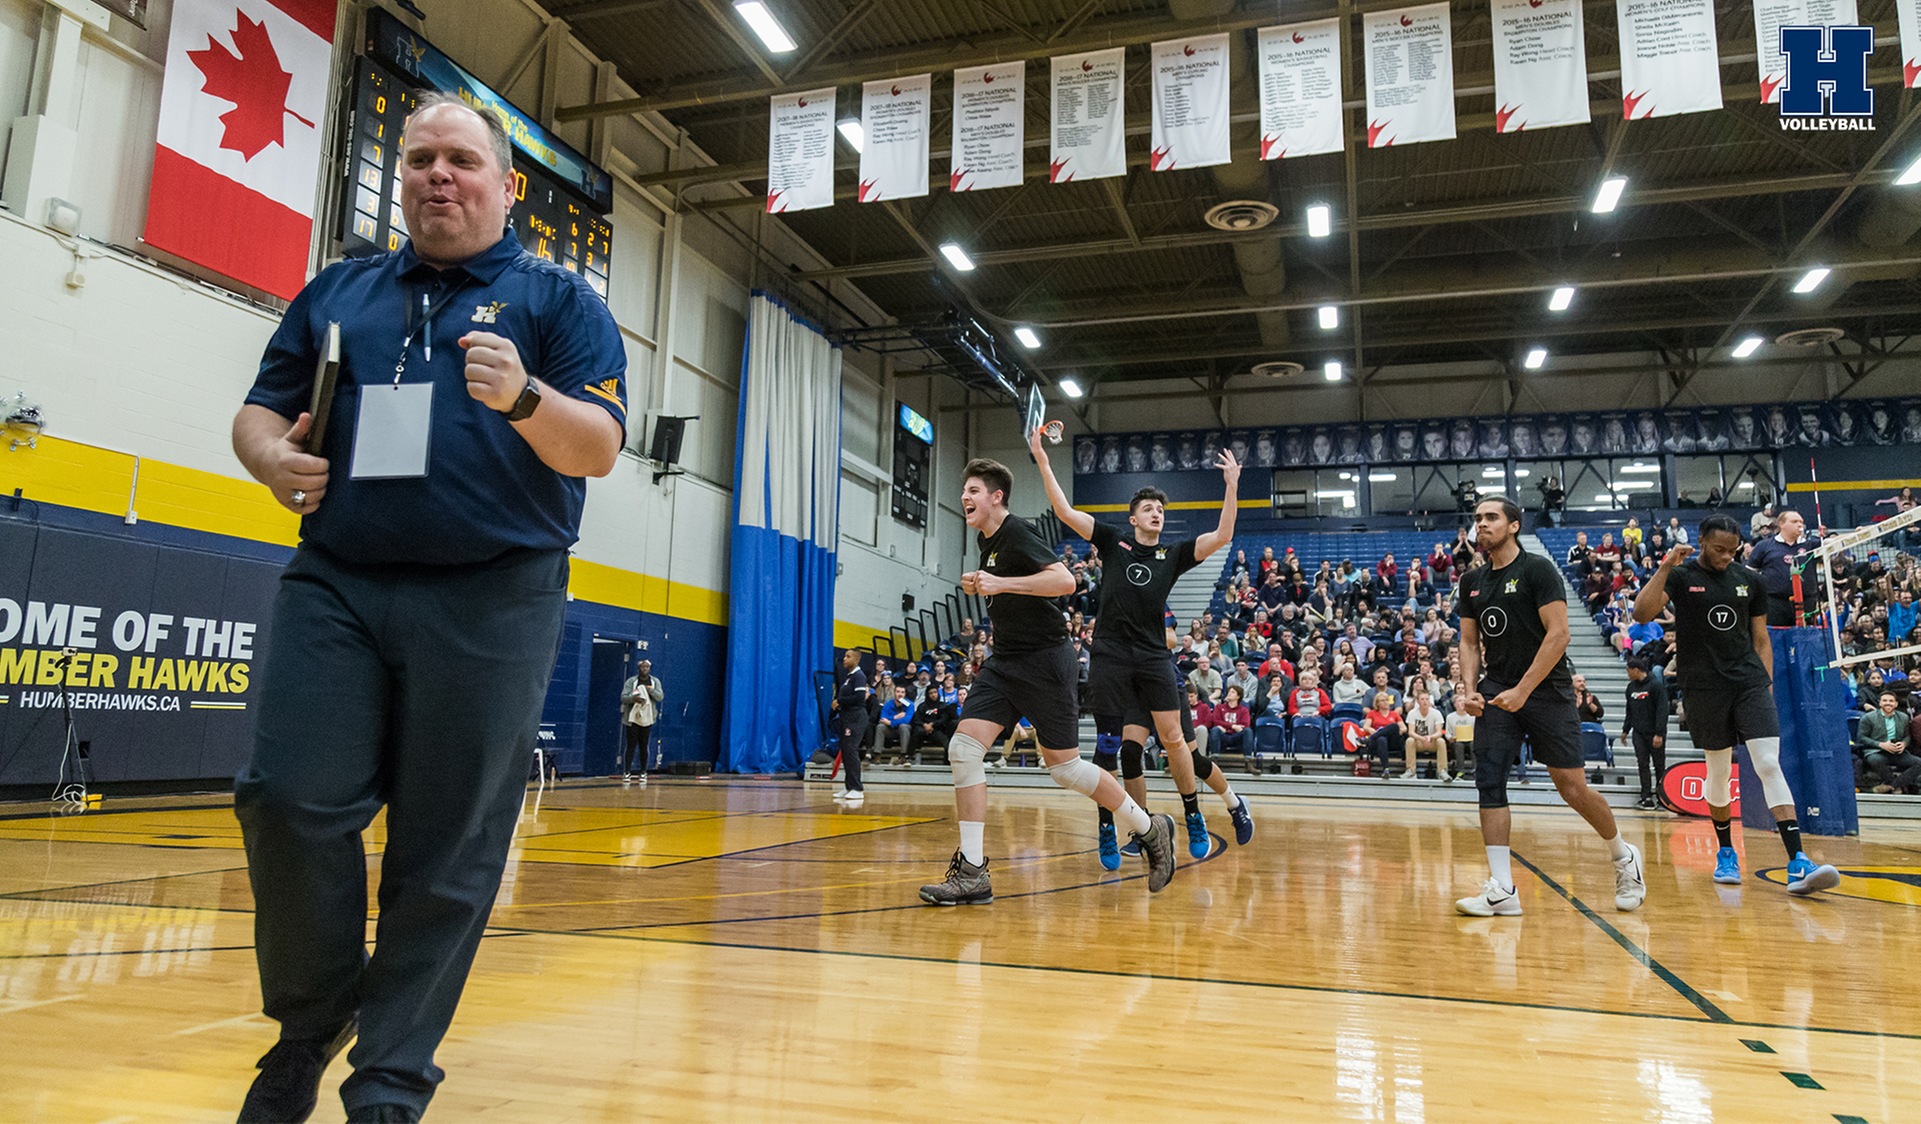 2019 Men's Volleyball Humber Cup